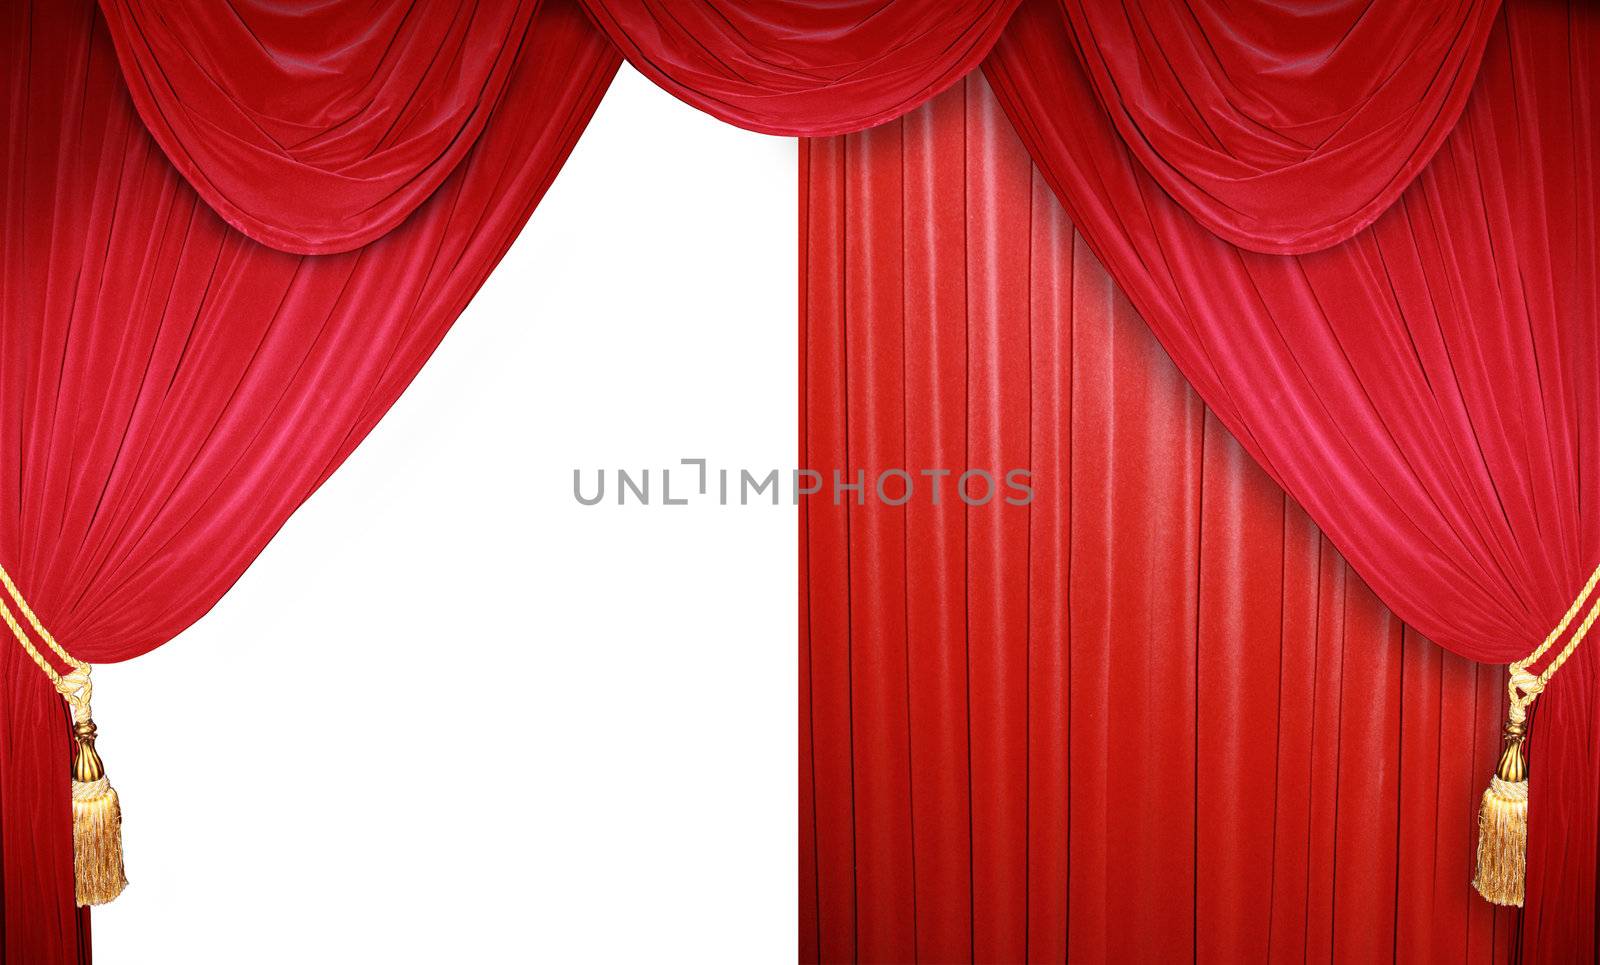 Red curtain of a classical theater 